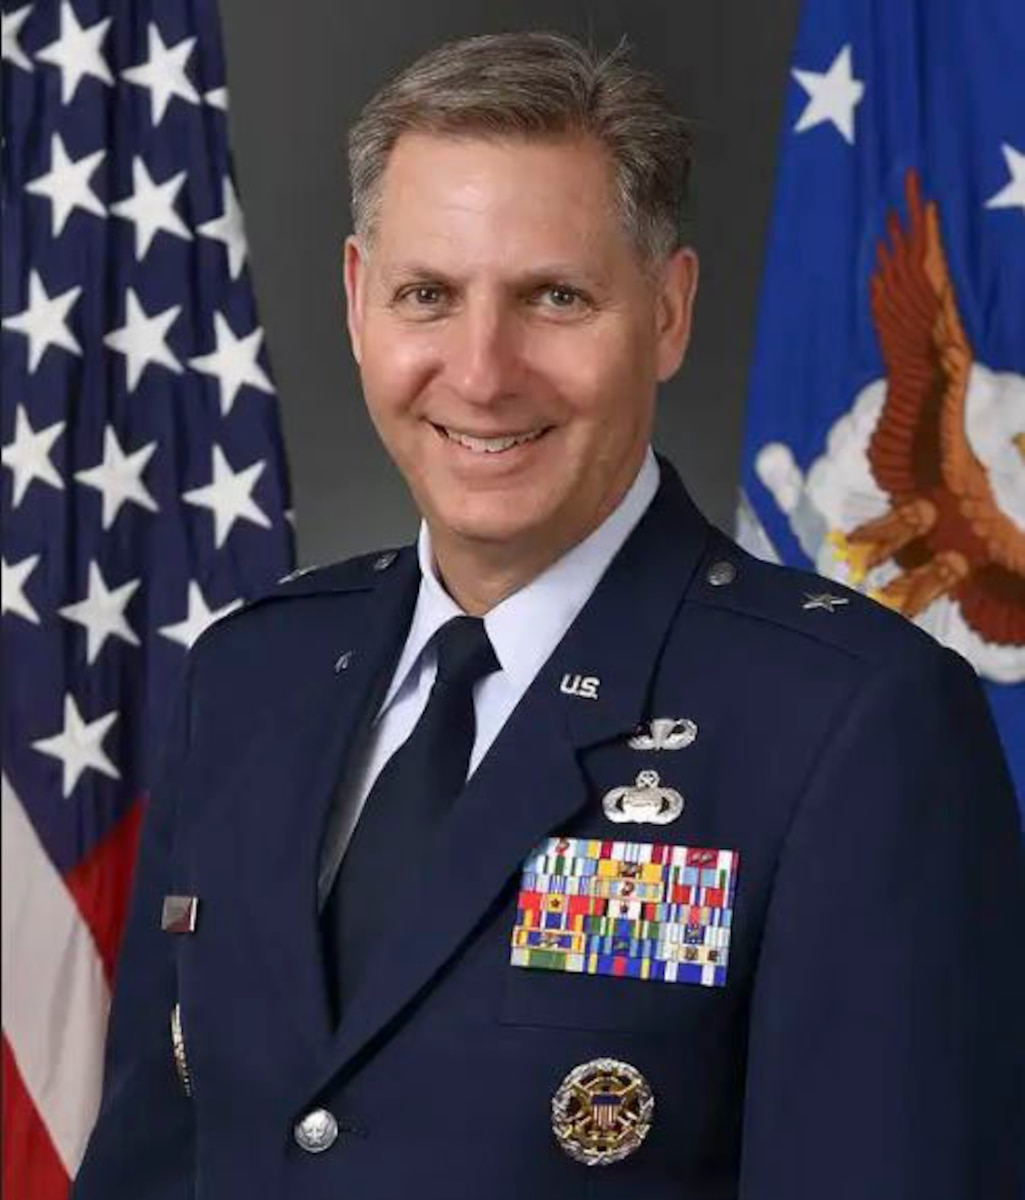 Brig. Gen. Shannon O’Harren is the Mobilization Assistant to the Commander, Sixteenth Air Force; Commander, Air Forces Cyber; Commander, Joint Force Headquarters-Cyber; and Commander, Service Cryptologic Component, Joint Base San Antonio-Lackland, Texas.